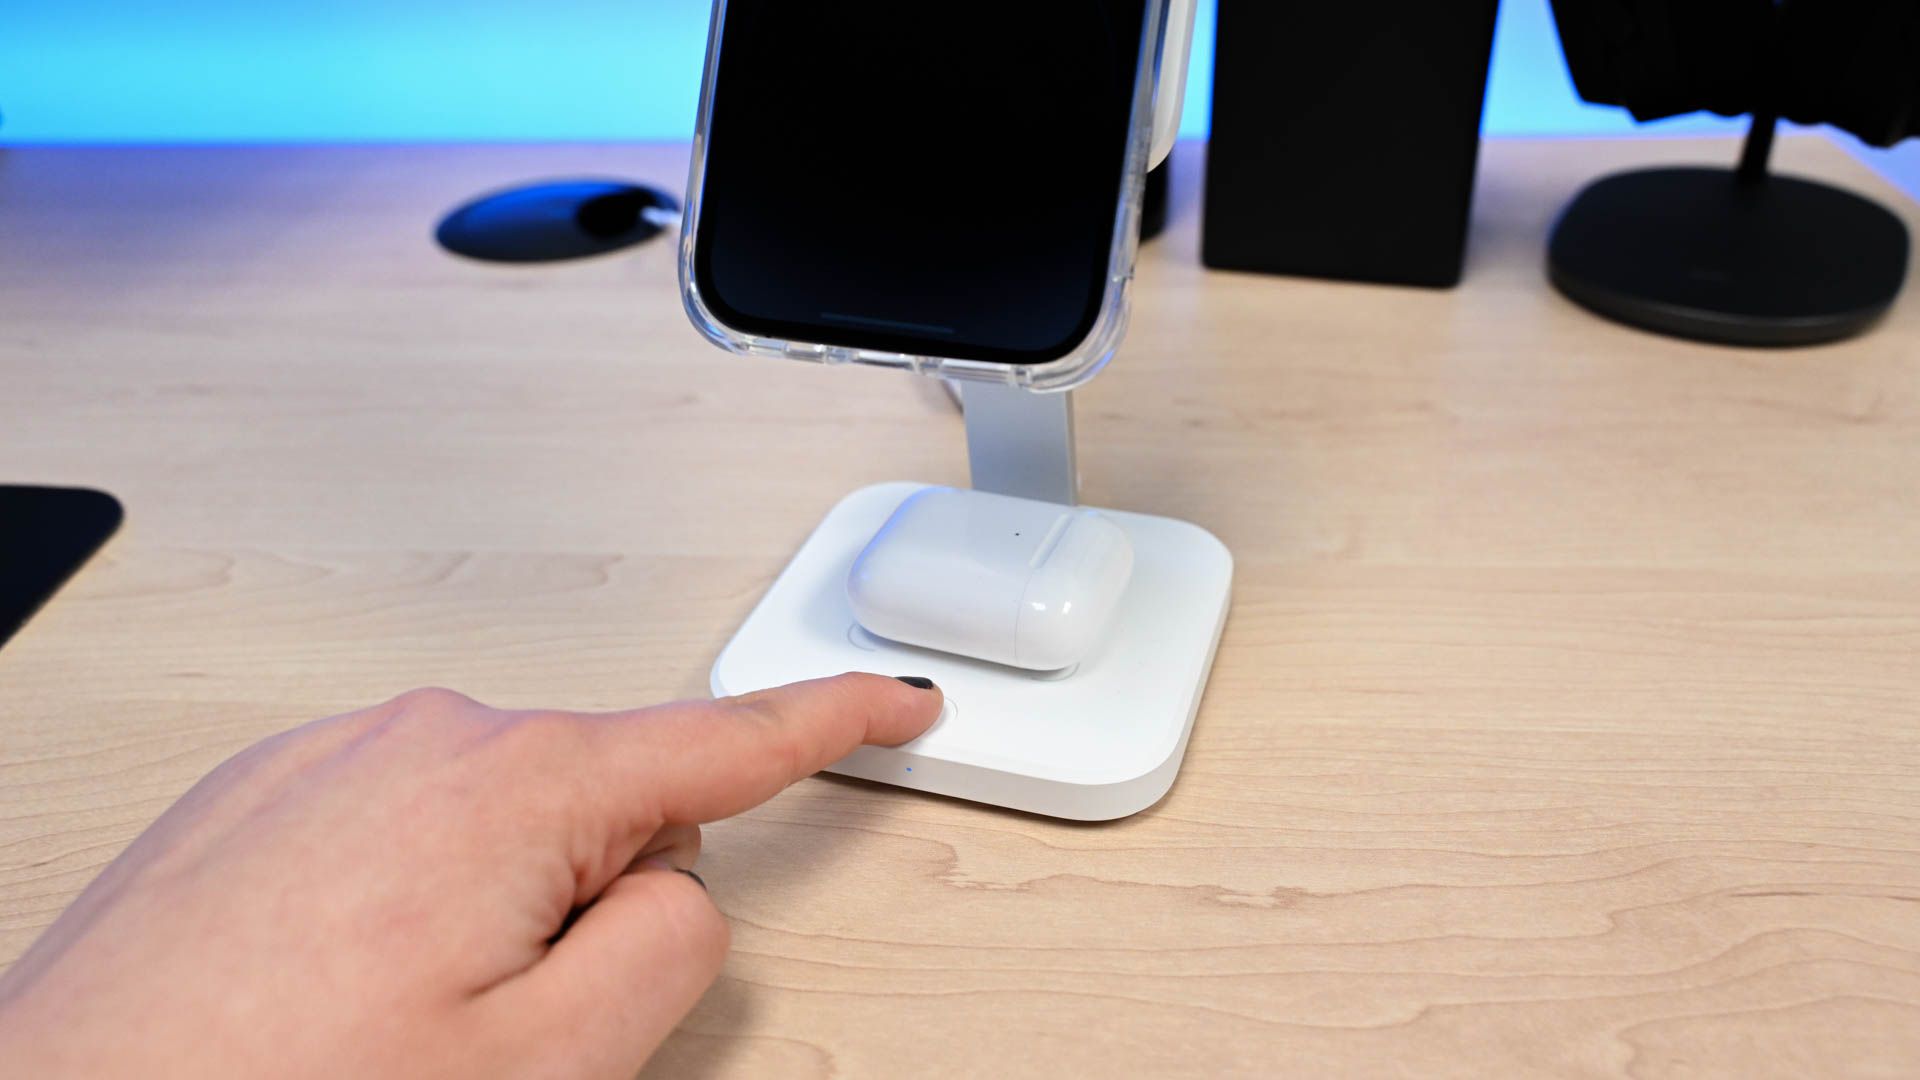 ESR HaloLock 2-in-1 Wireless Charger with CryoBoost power button